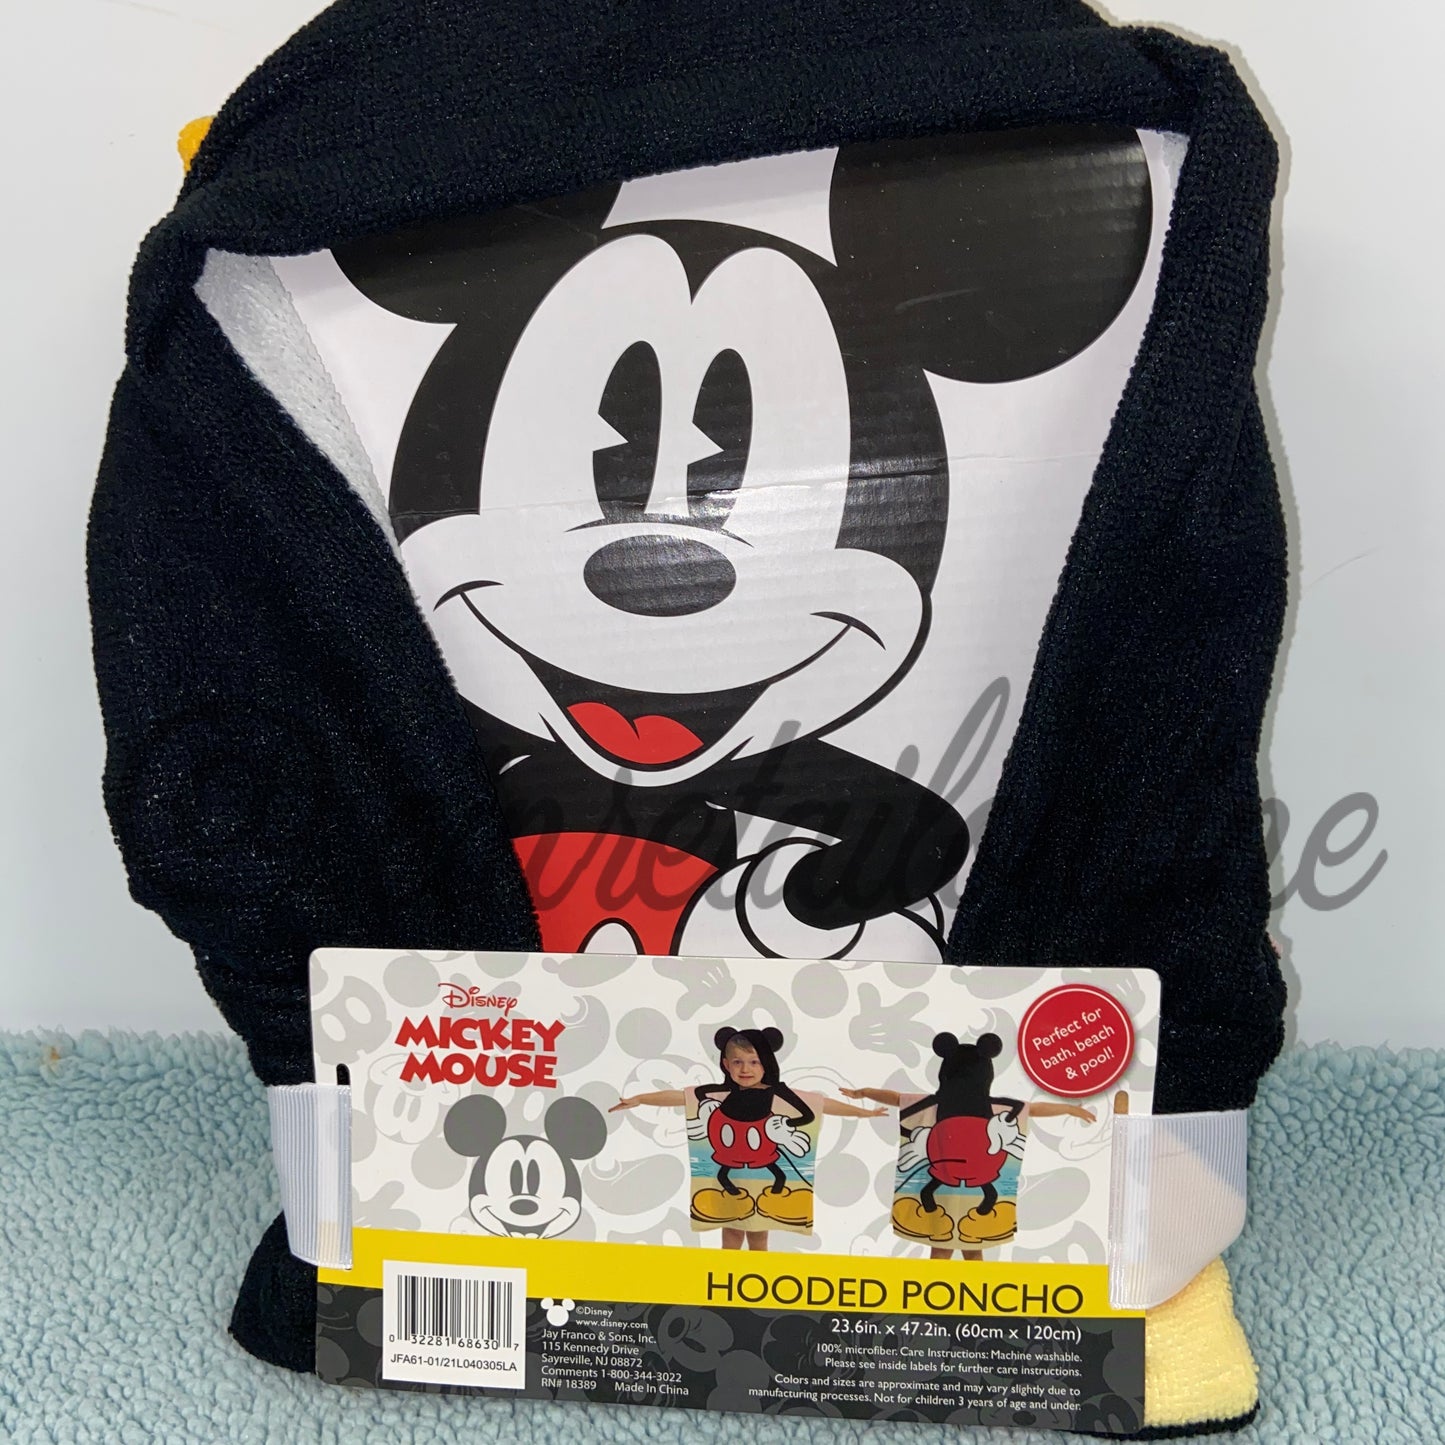 Mickey Mouse poncho towel